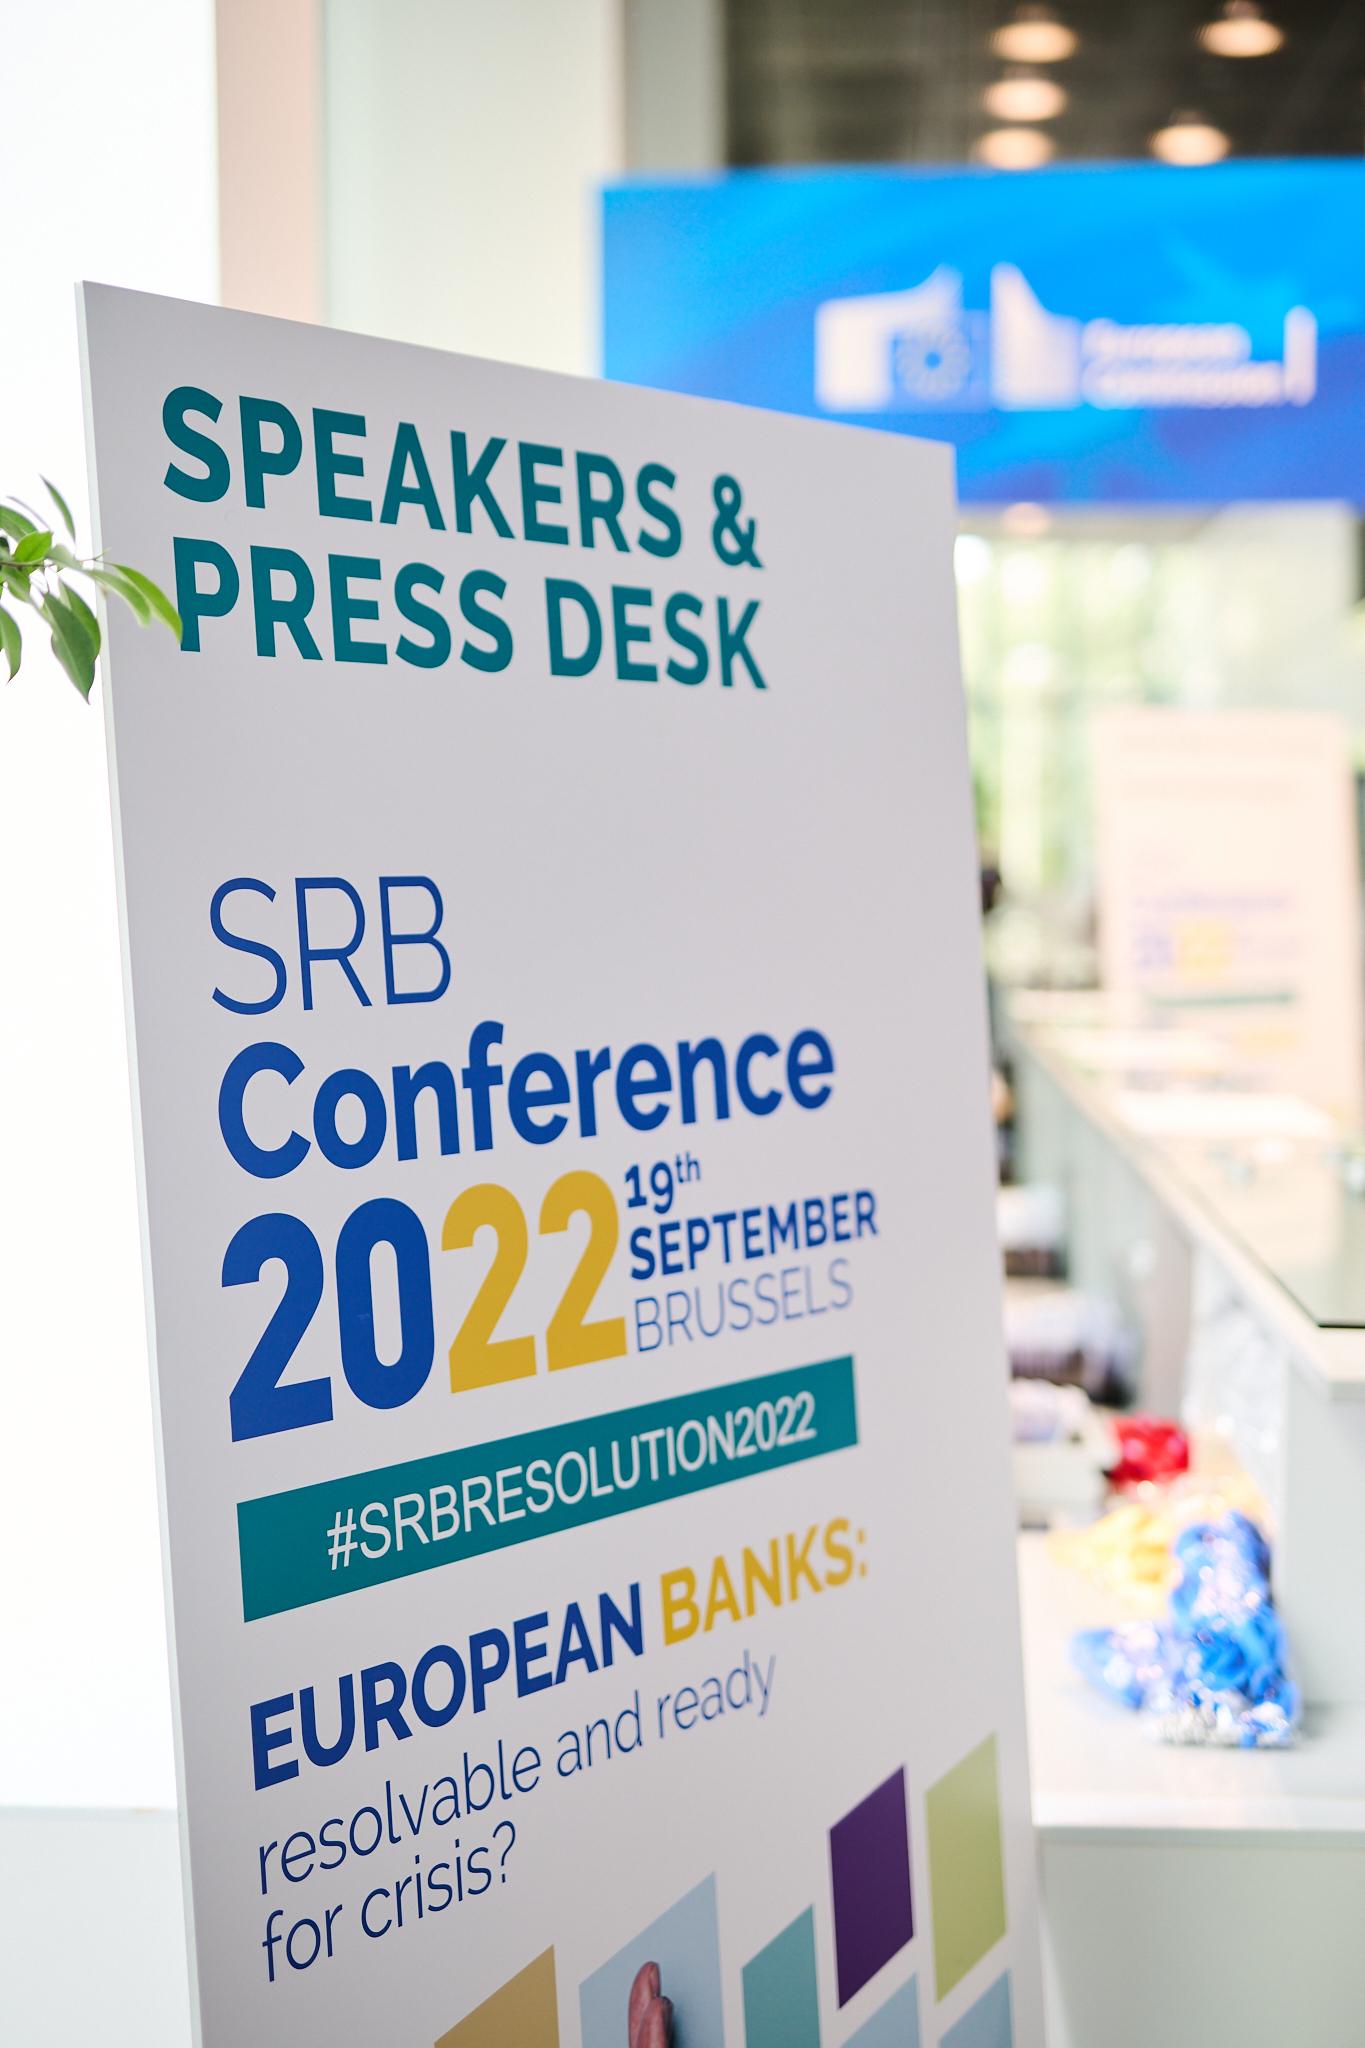 SRB Conference 2022 European banks resolvable and ready for crisis